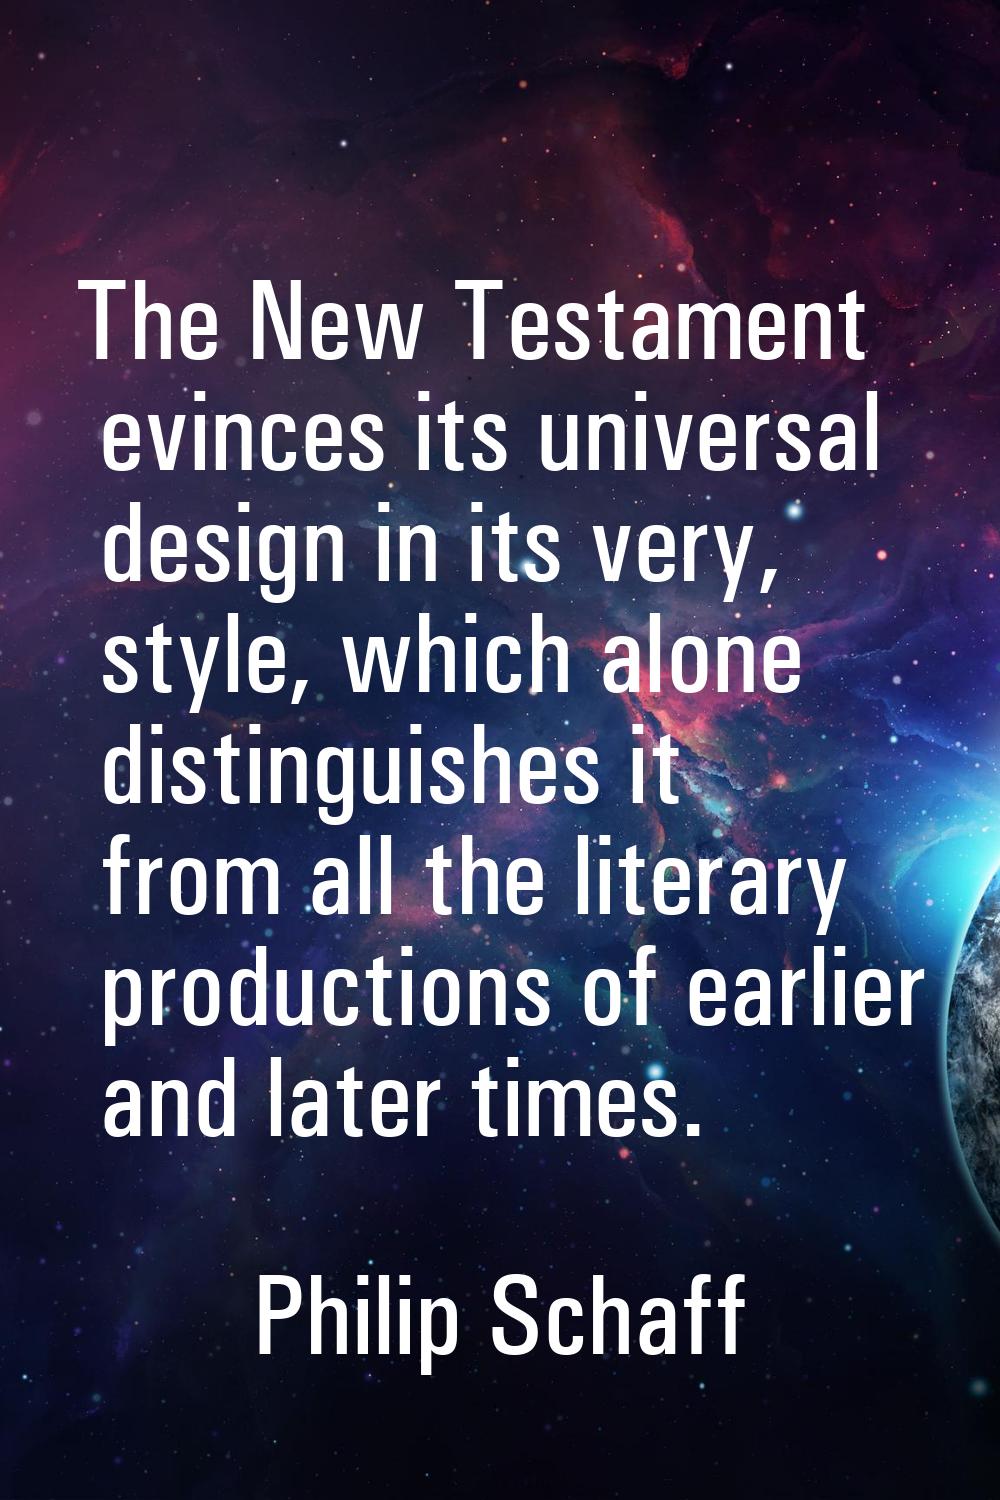 The New Testament evinces its universal design in its very, style, which alone distinguishes it fro